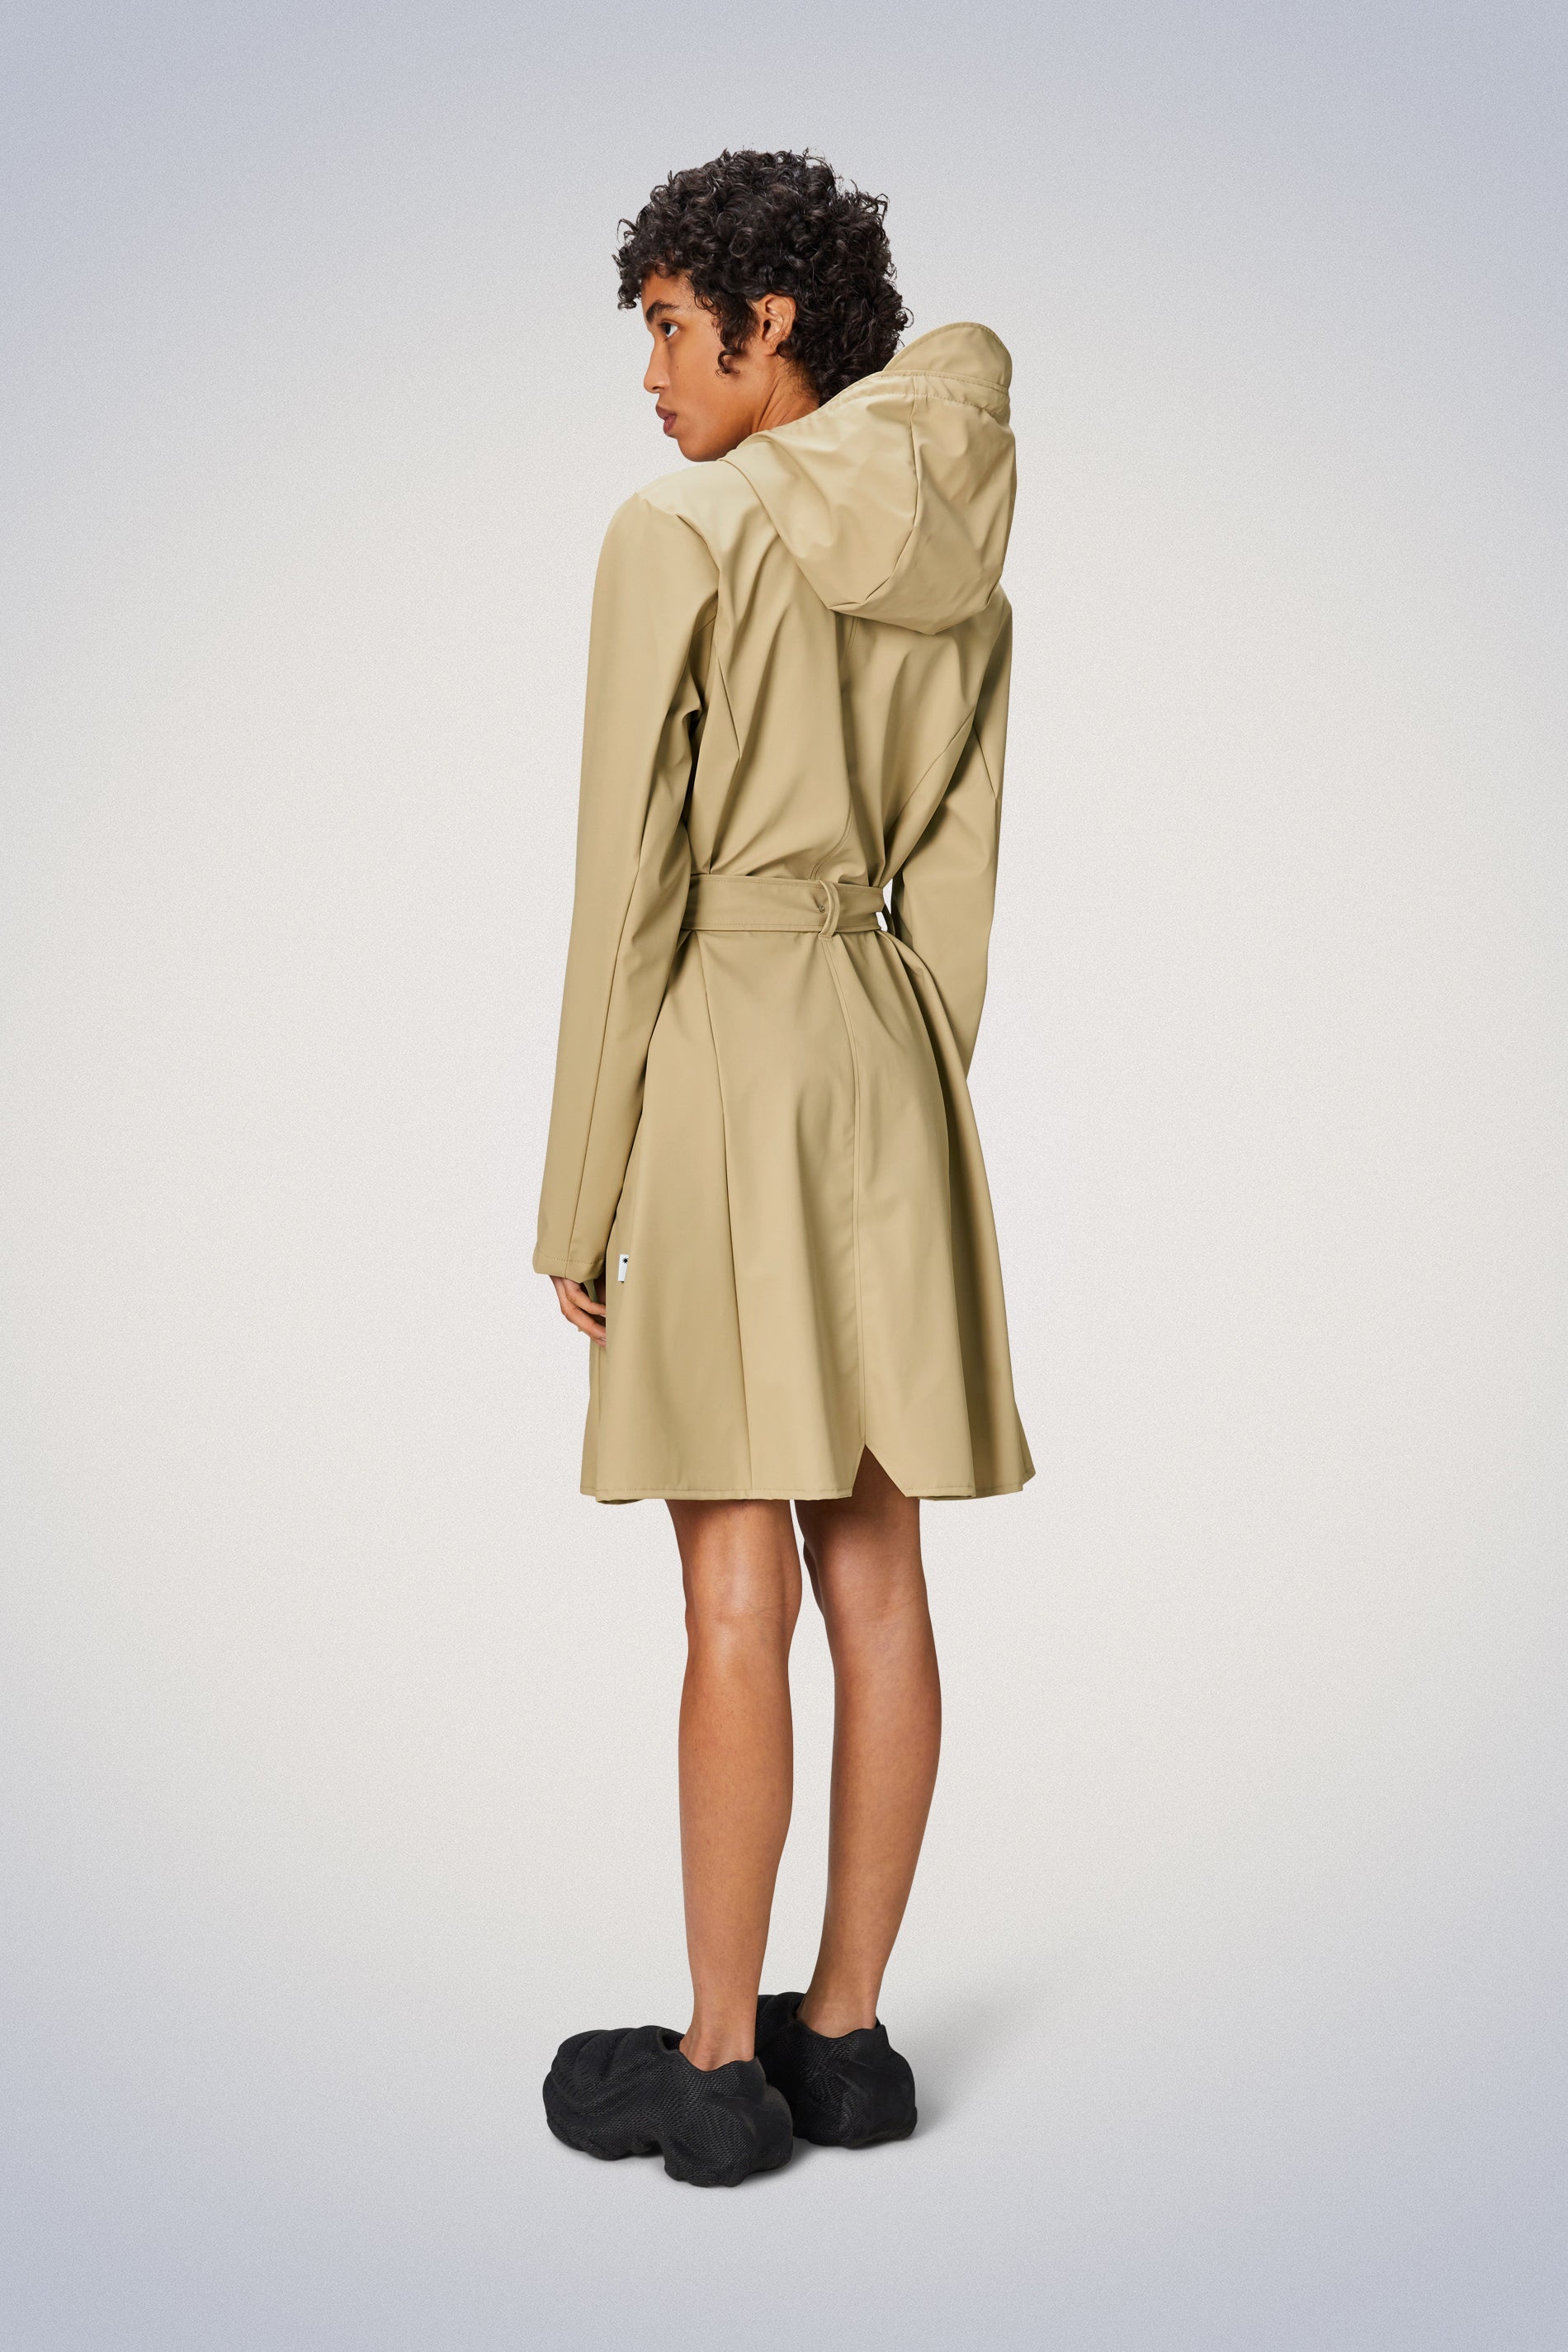 The Curve Jacket - Sand by Rains is a beige trench coat that combines practicality and style. It features a double-breasted front, water-resistant material, and a back vent for ease of movement.